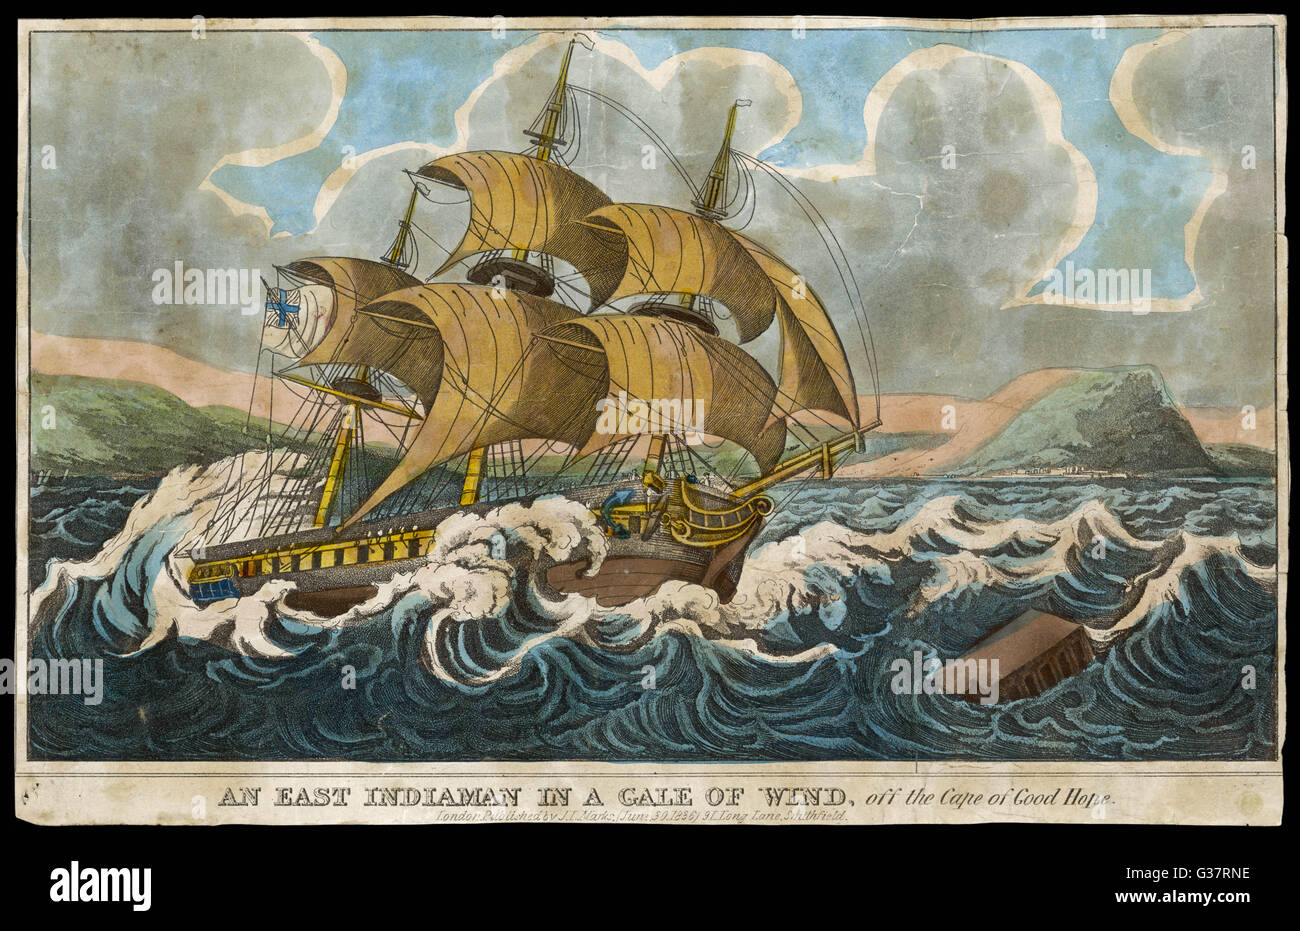 An East Indiaman in a gale  off the Cape of Good Hope         Date: 1836 Stock Photo